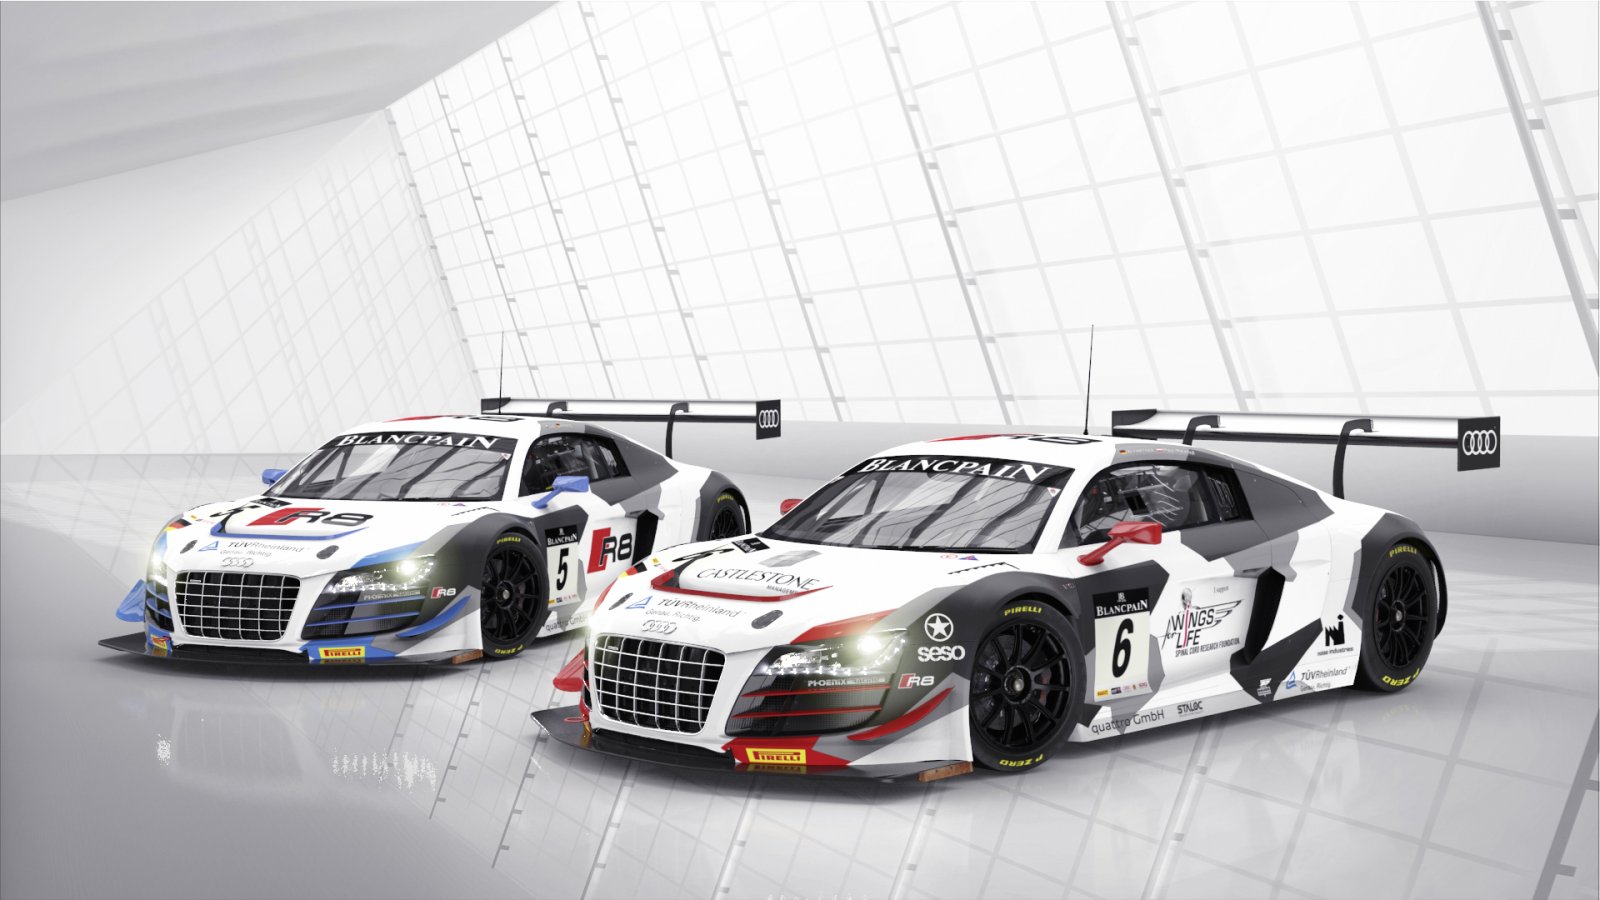 Phoenix Racing fields two Audi R8 LMS ultra in the Blancpain Sprint Series